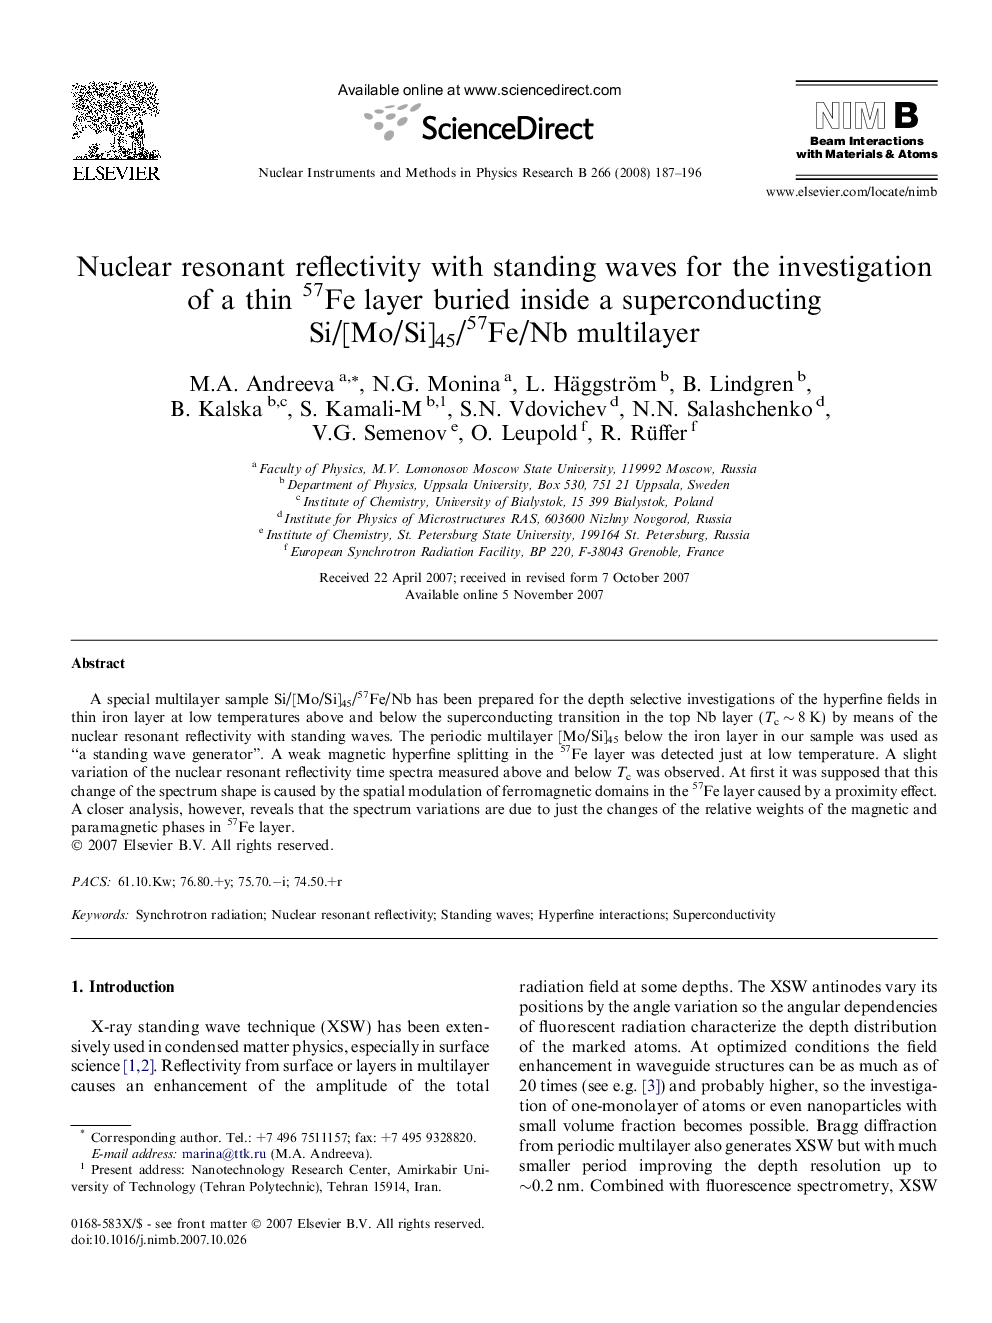 Nuclear resonant reflectivity with standing waves for the investigation of a thin 57Fe layer buried inside a superconducting Si/[Mo/Si]45/57Fe/Nb multilayer